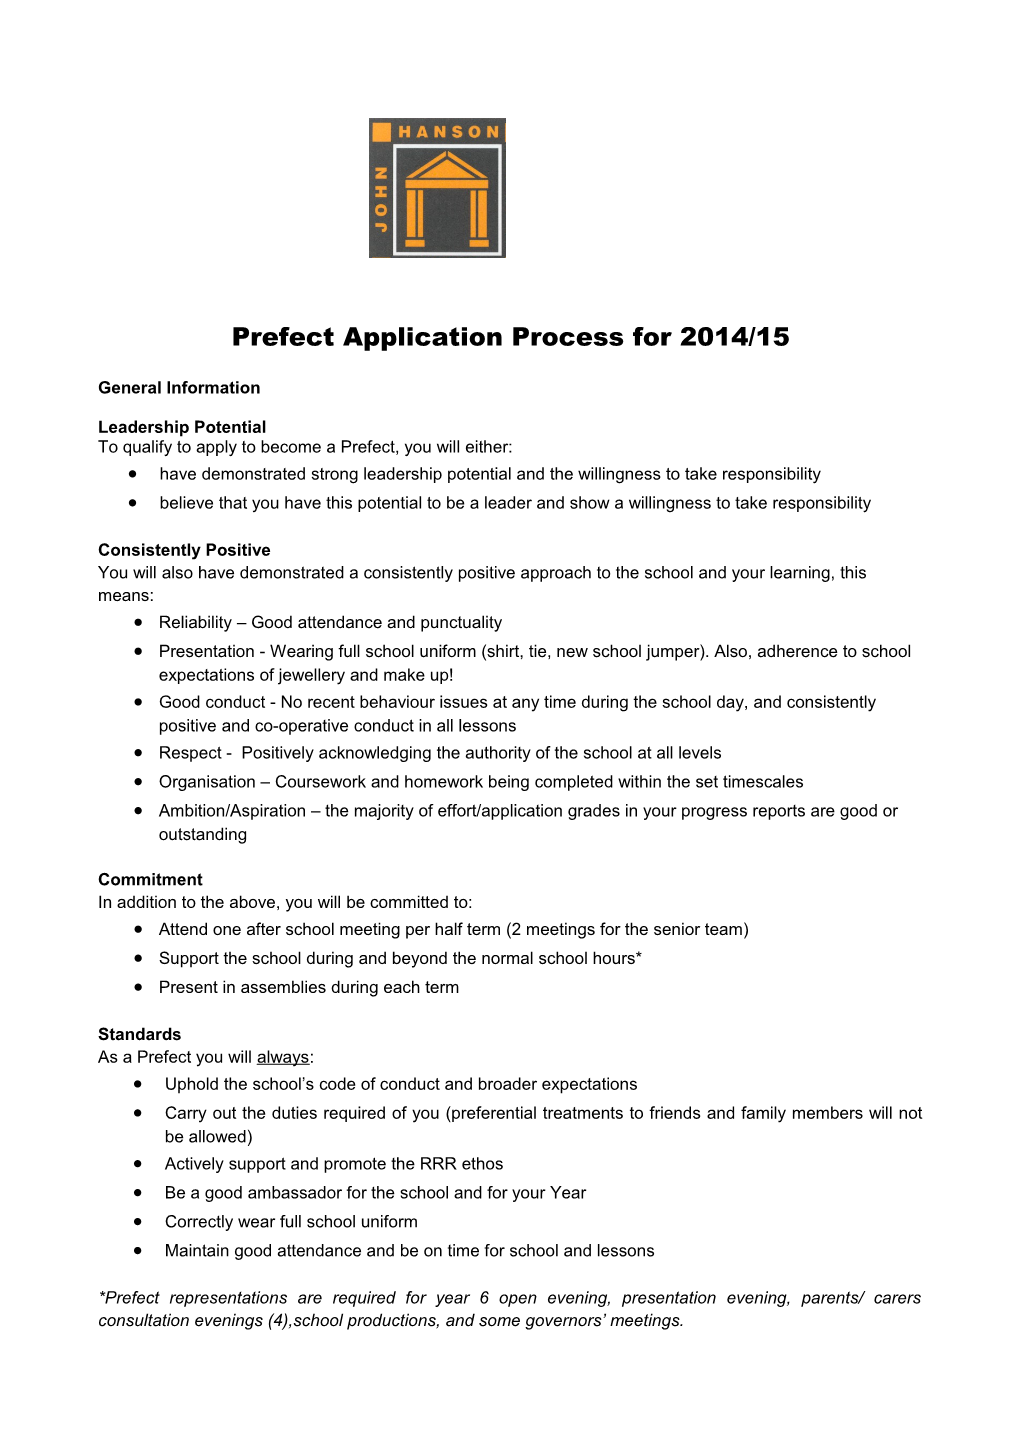 Prefect Application Process for 2014/15